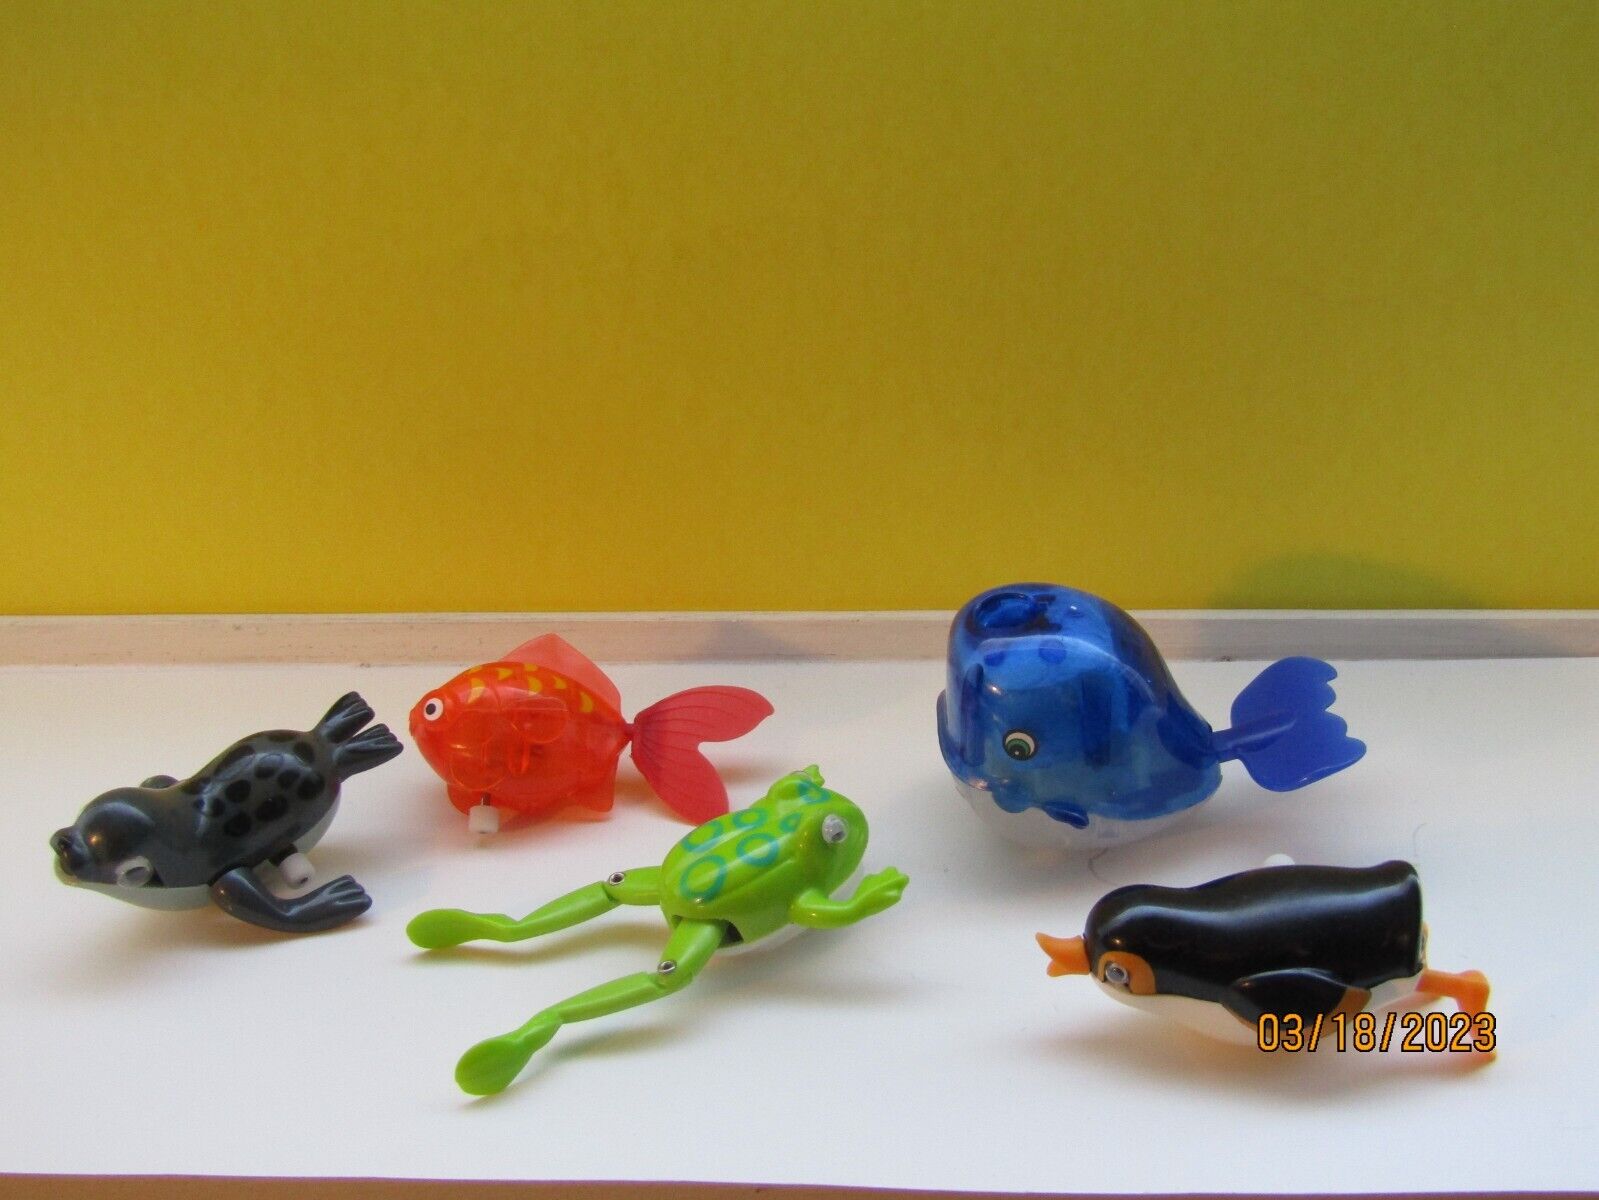 Lot 5 vtg 1980's Tomy Bath Tubbies Wind-up Bath toys Frog, Whale, Seal, Fish + TOMY